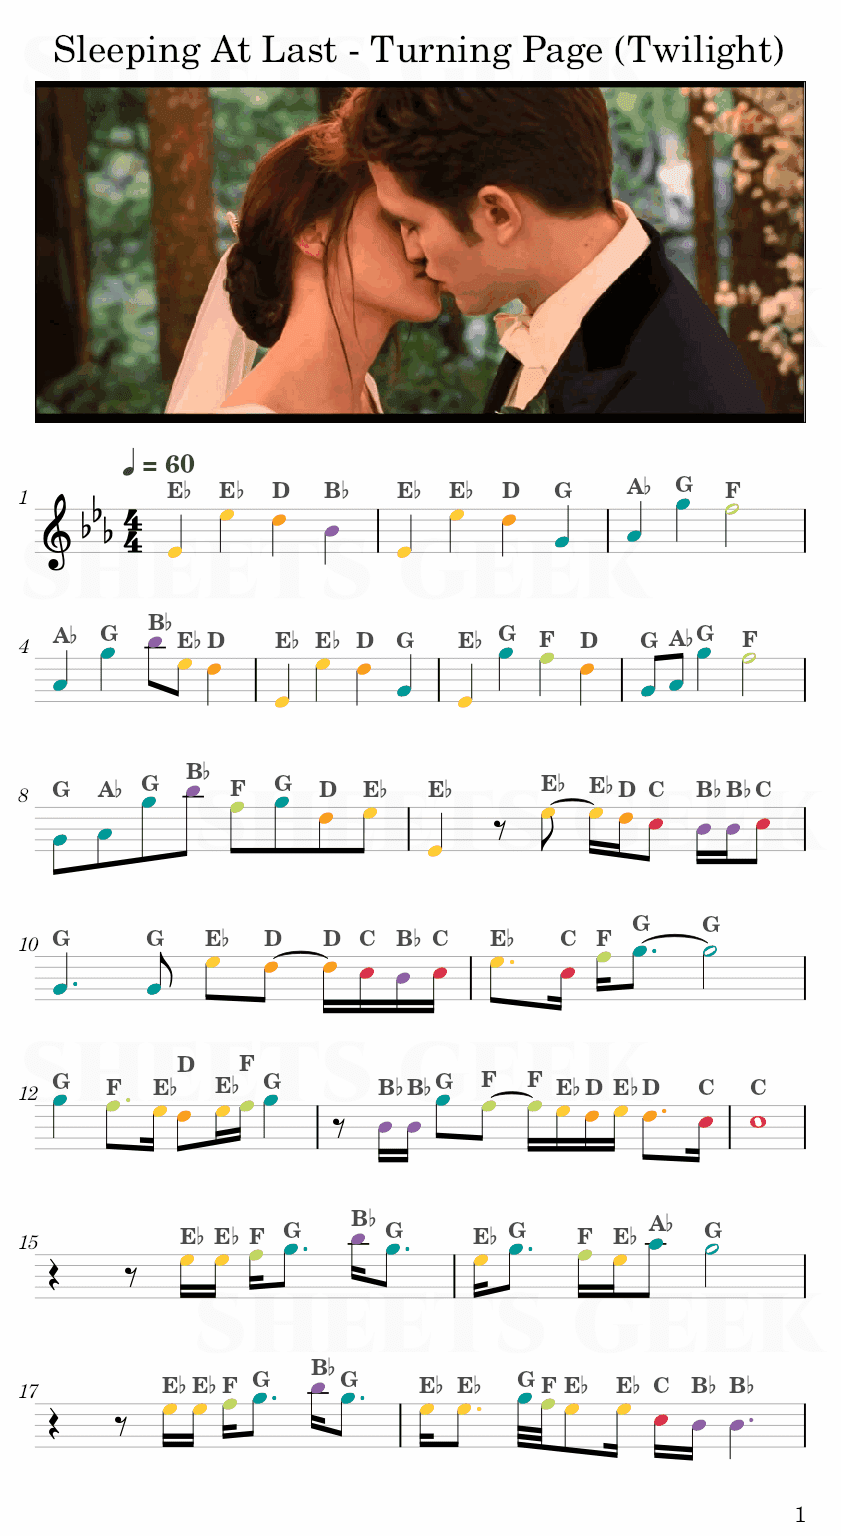 Sleeping At Last - Turning Page (Twilight: Breaking Dawn) Easy Sheet Music Free for piano, keyboard, flute, violin, sax, cello page 1